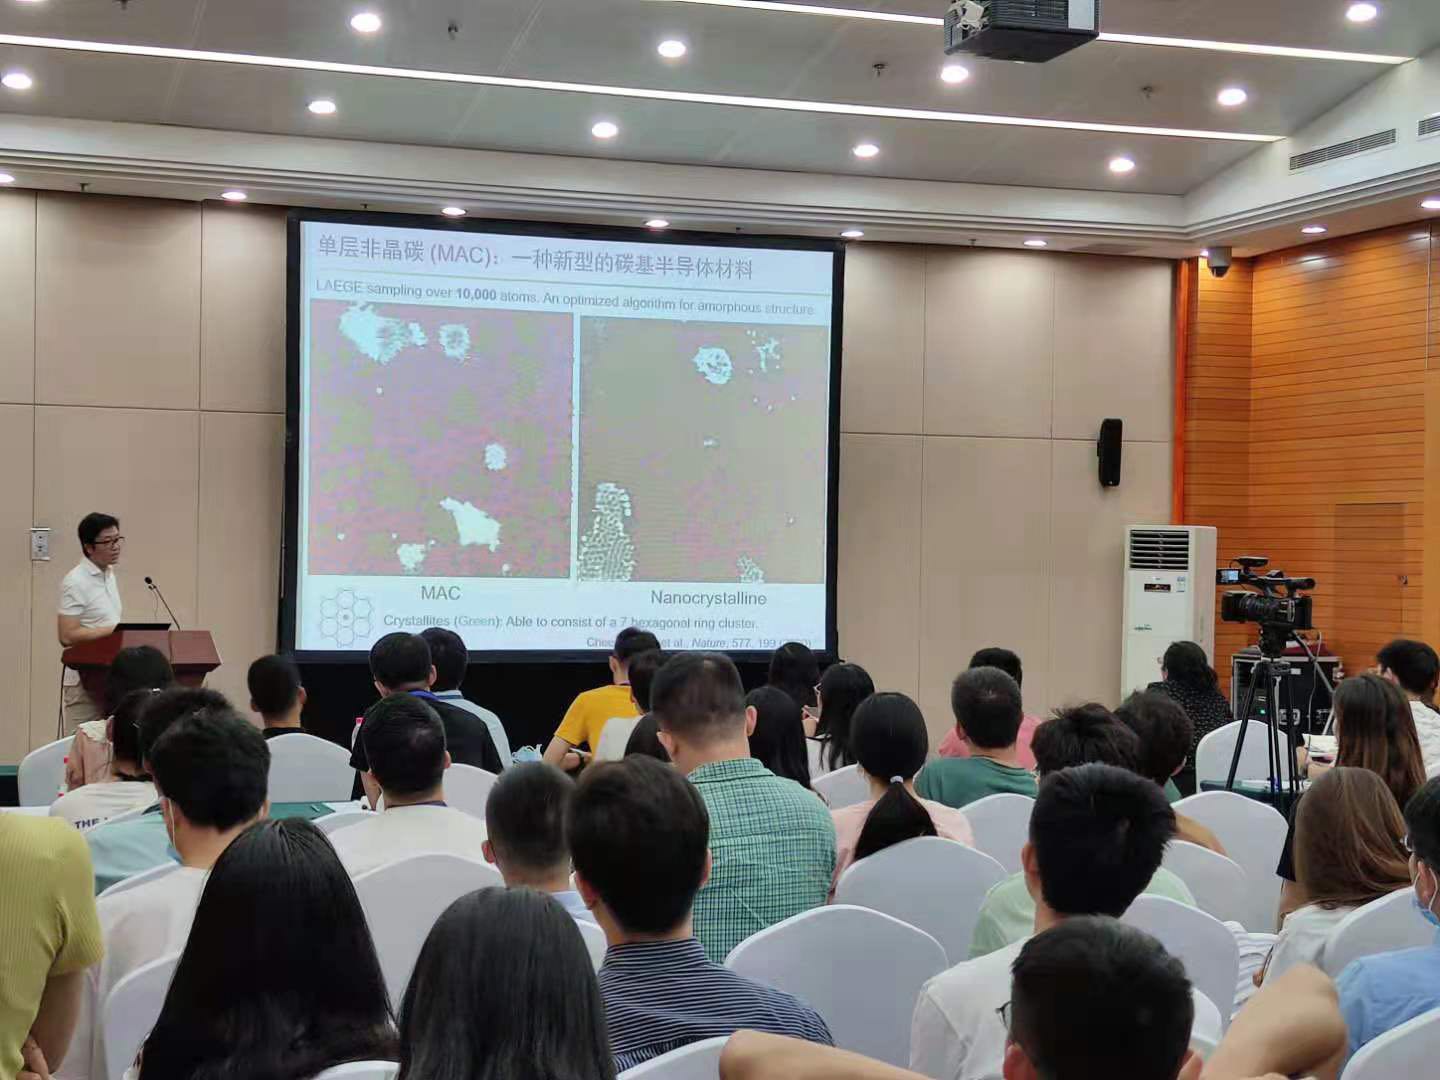 Prof. Junhao Lin gave an invited lecture in the 23rd semiconducting conference, China